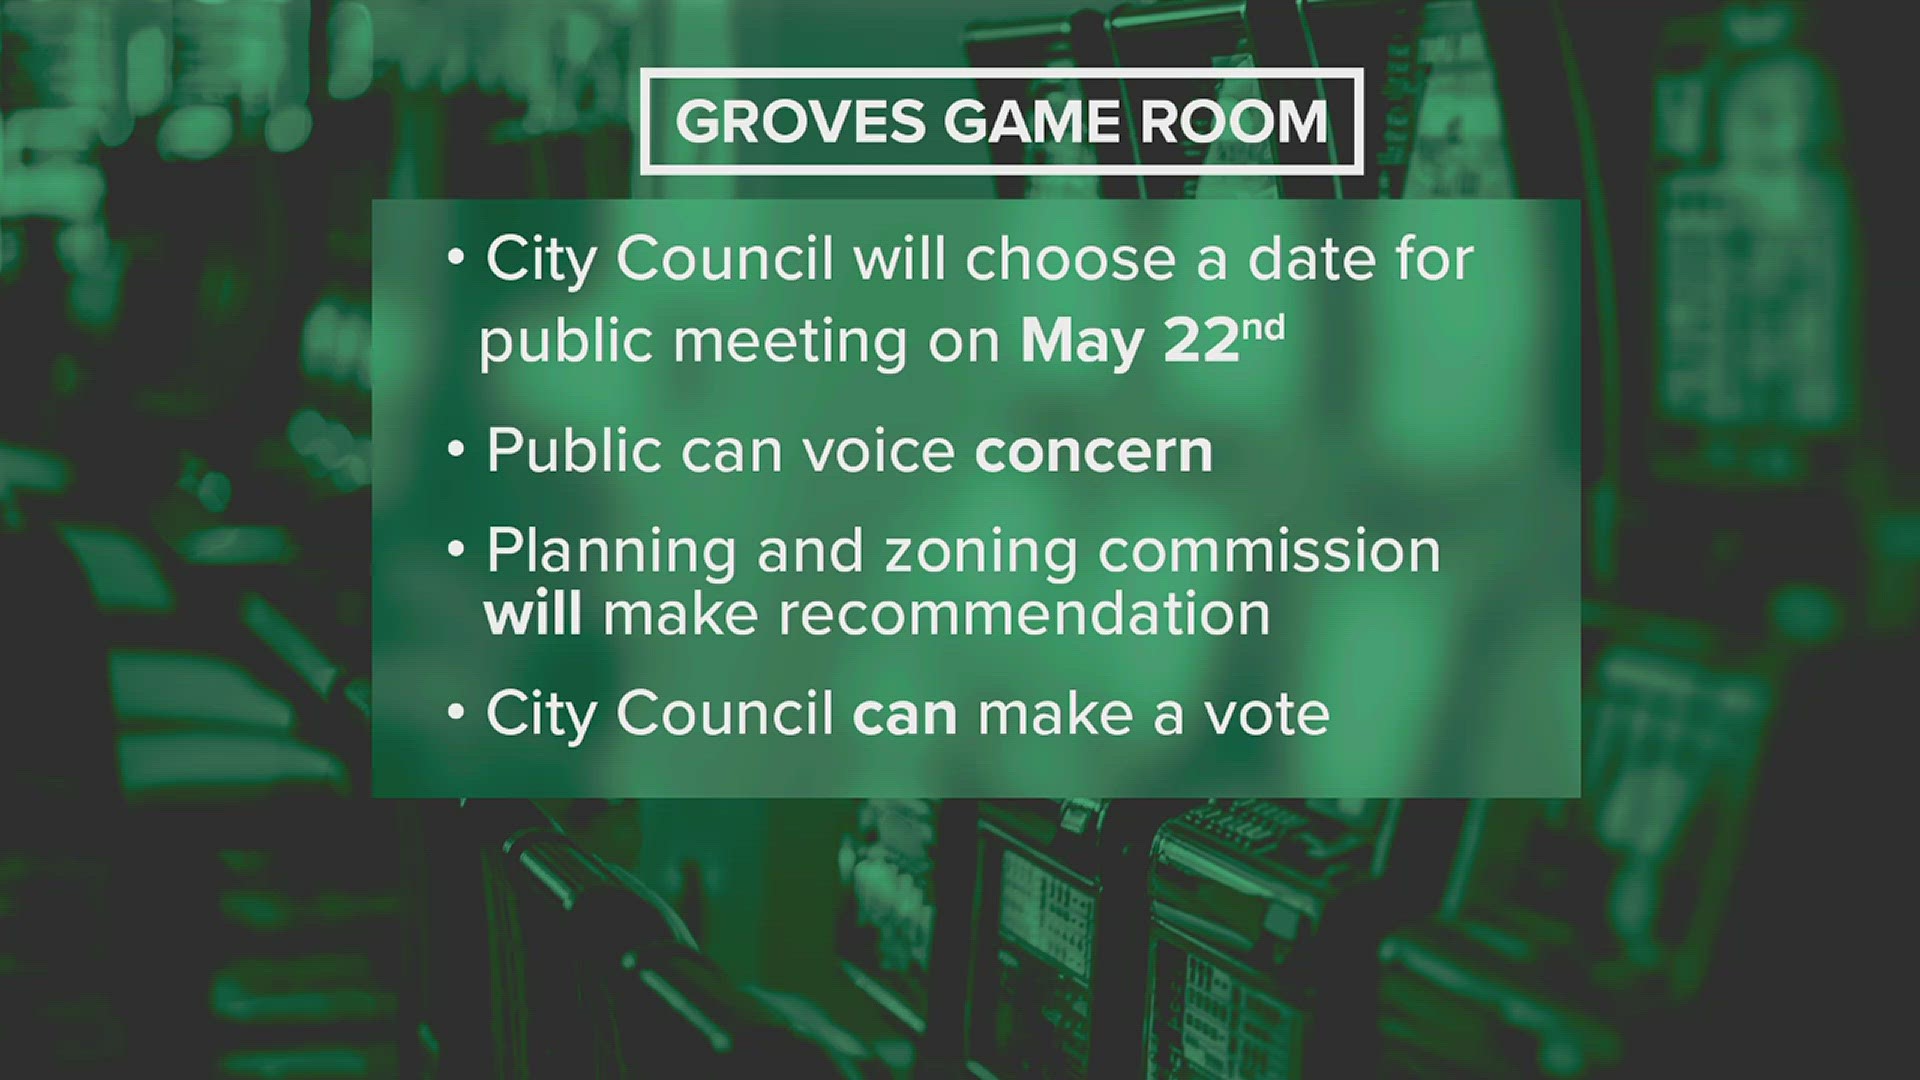 Two people are asking for permission to continue operating three existing game rooms within city limits.